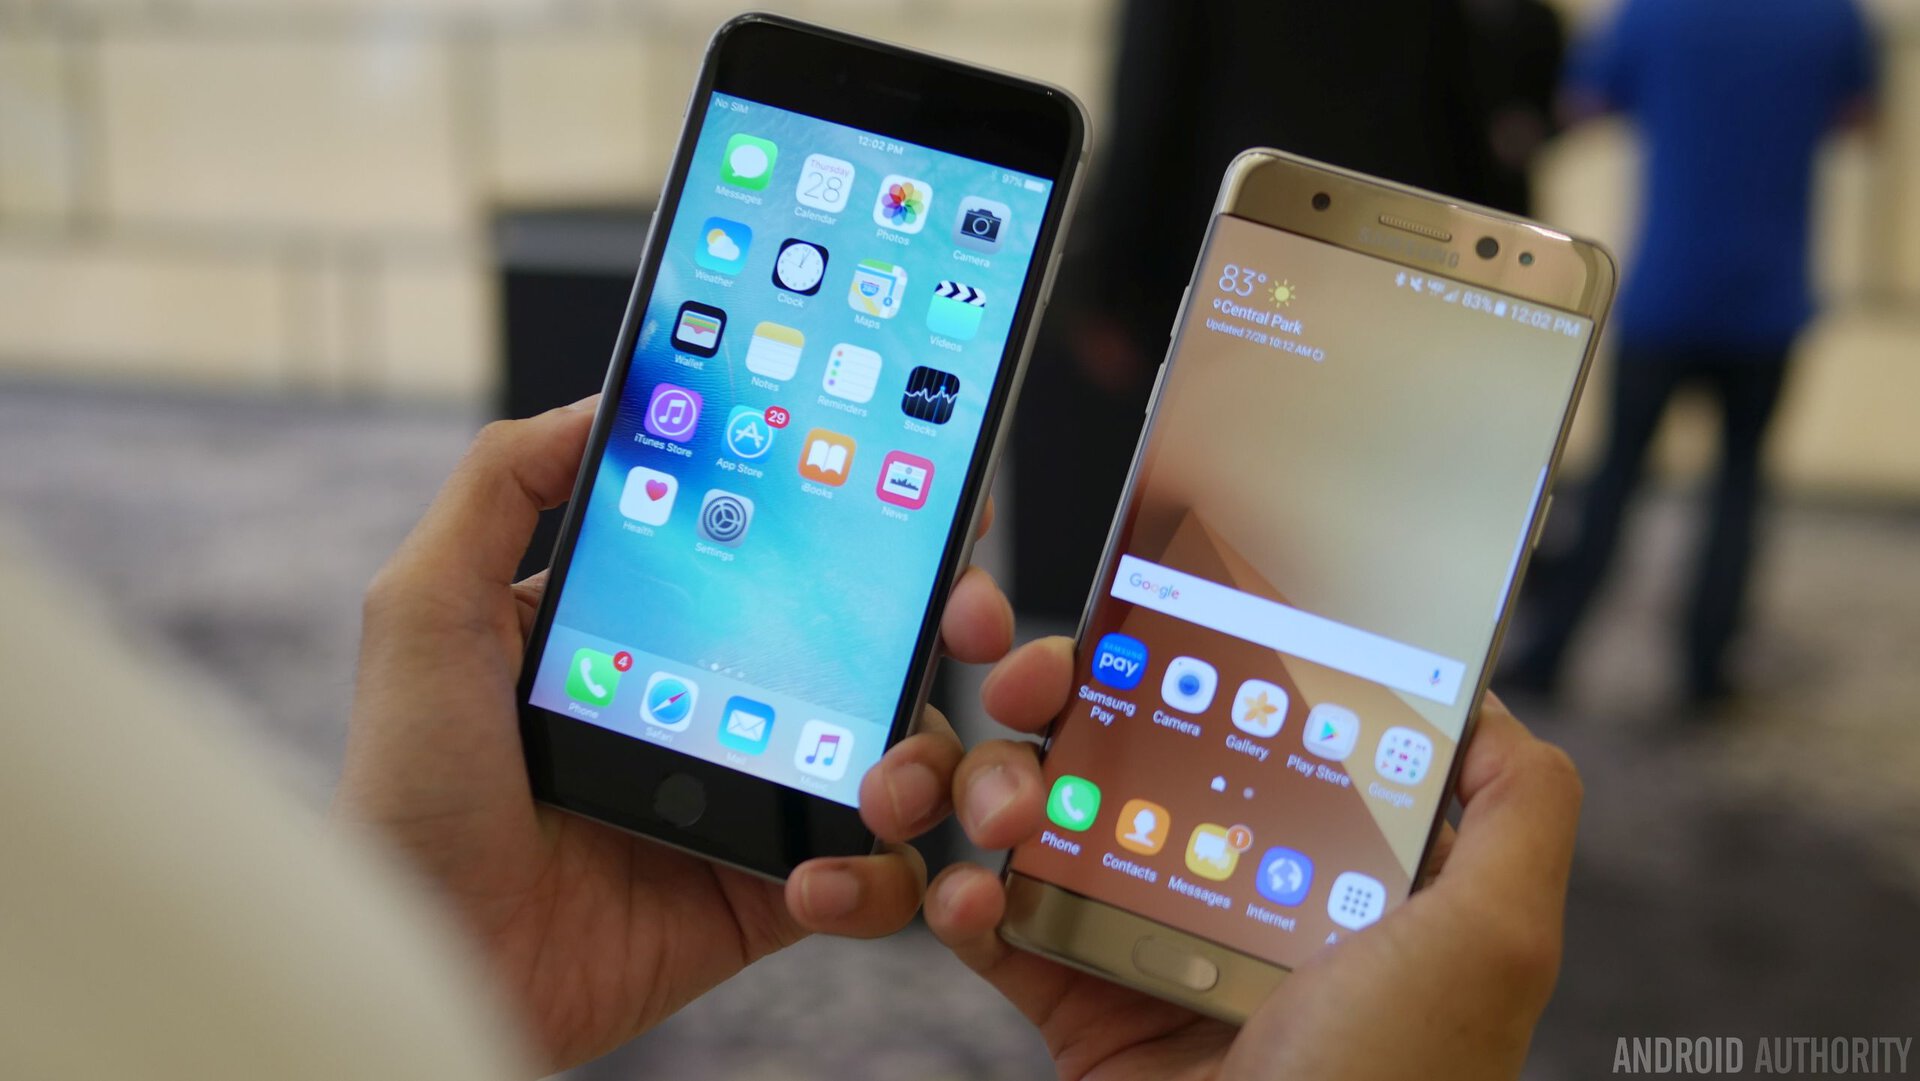 Samsung Galaxy Note 7 vs Apple iPhone 6s Plus first look 1